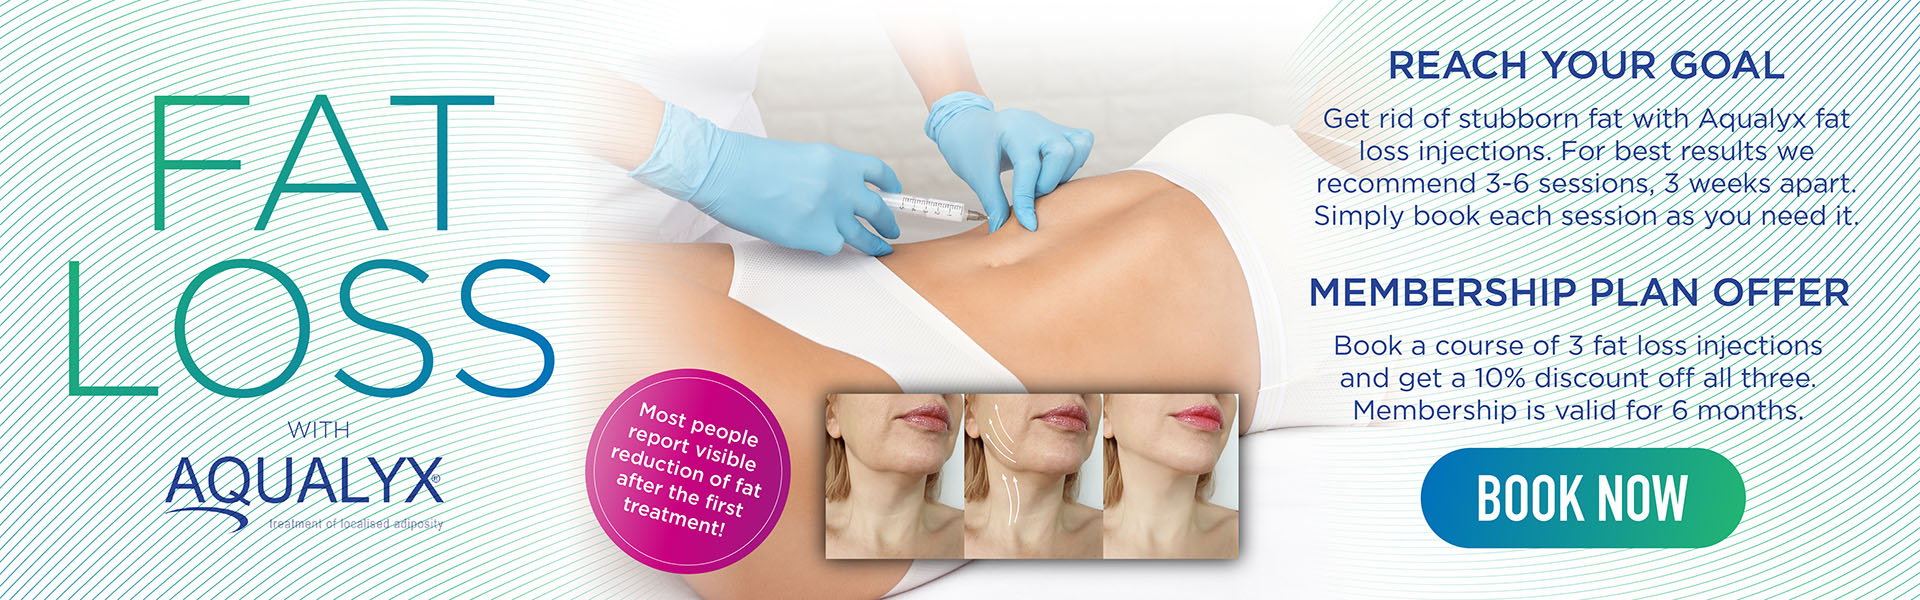 Fat Loss Injections Halifax / Huddersfield | Fat Dissolving Injections Halifax / Huddersfield | Fat Reducing Injections Ripponden Sowerby Bridge Halifax West Yorkshire | Book now at XIV SALON